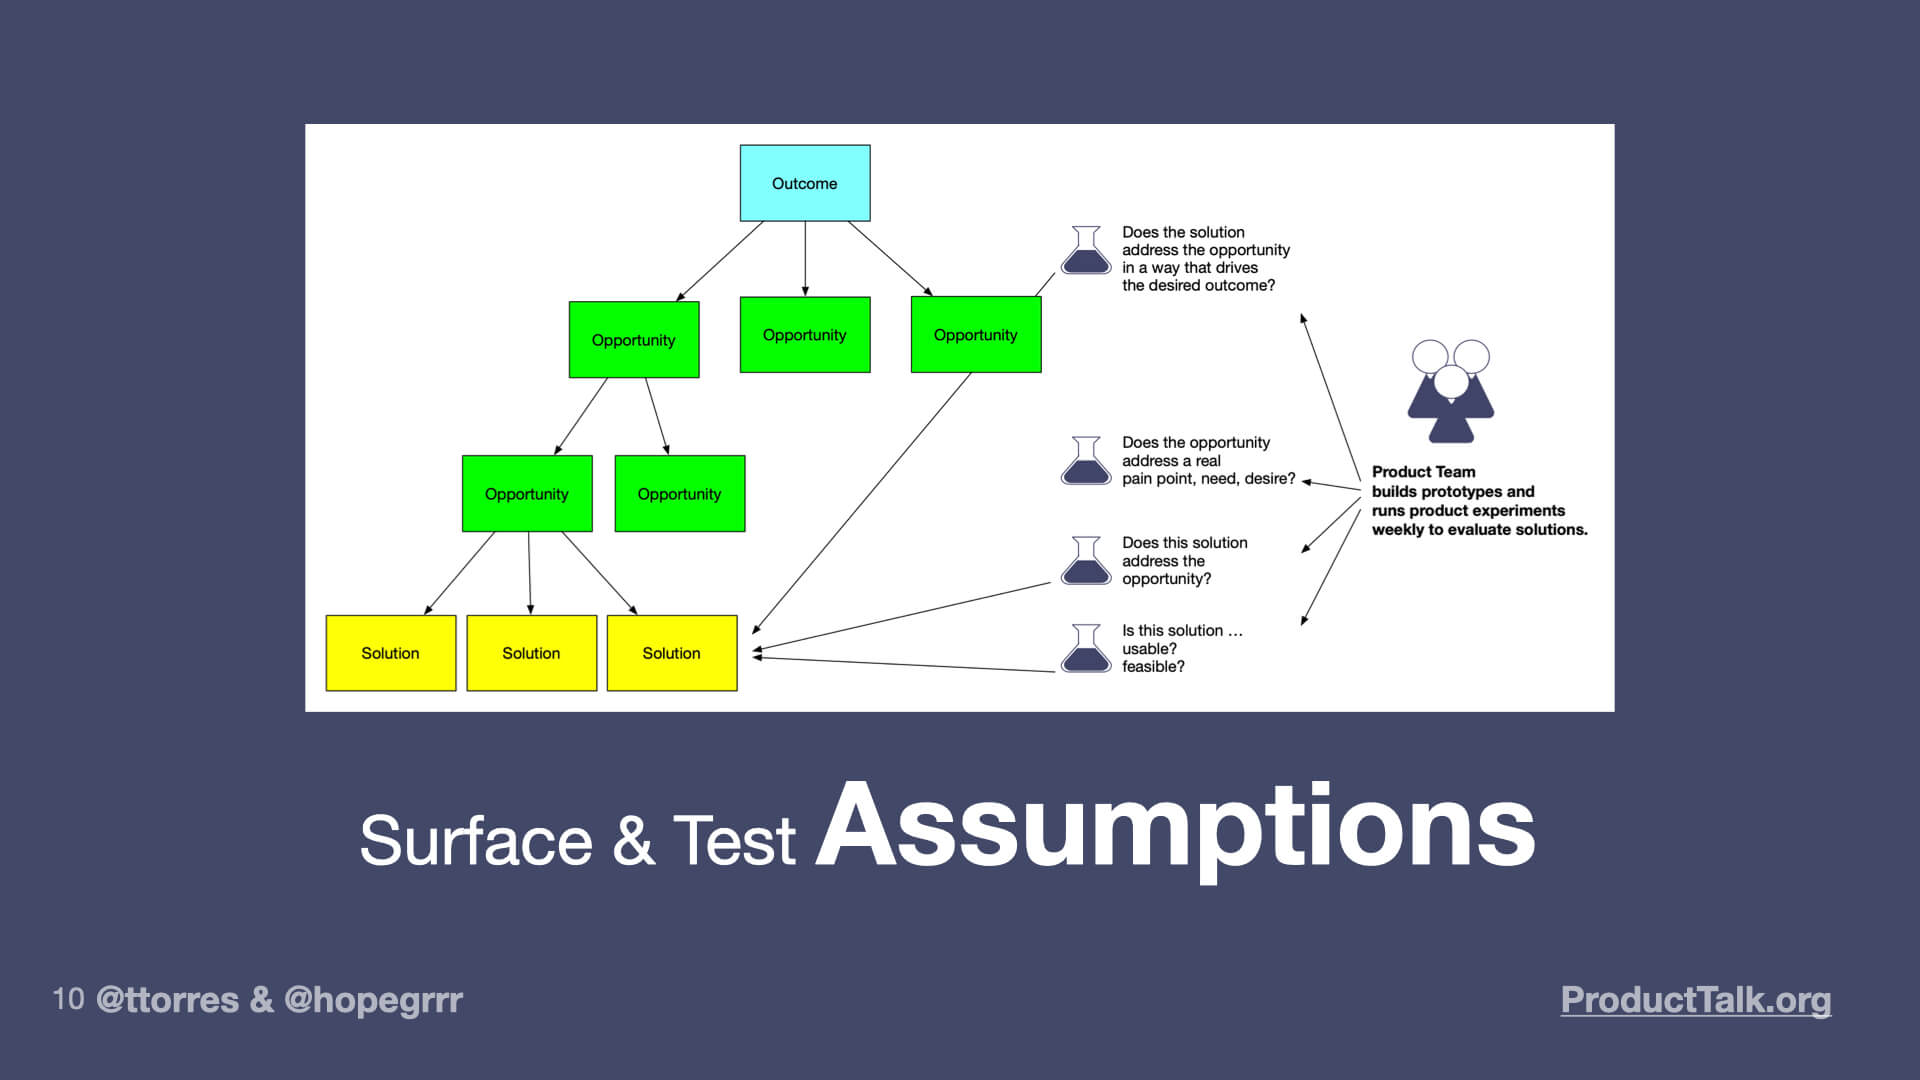 A diagram of an opportunity solution tree. There's an outcome at the top, which branches into several opportunities, which in turn branch into several solutions. There are questions associated with the opportunities and solutions such as "Does this solution address the opportunity in a way that drives the desired outcome?" "Is this solution usable? Feasible?" The image is labeled "Surface and test assumptions."